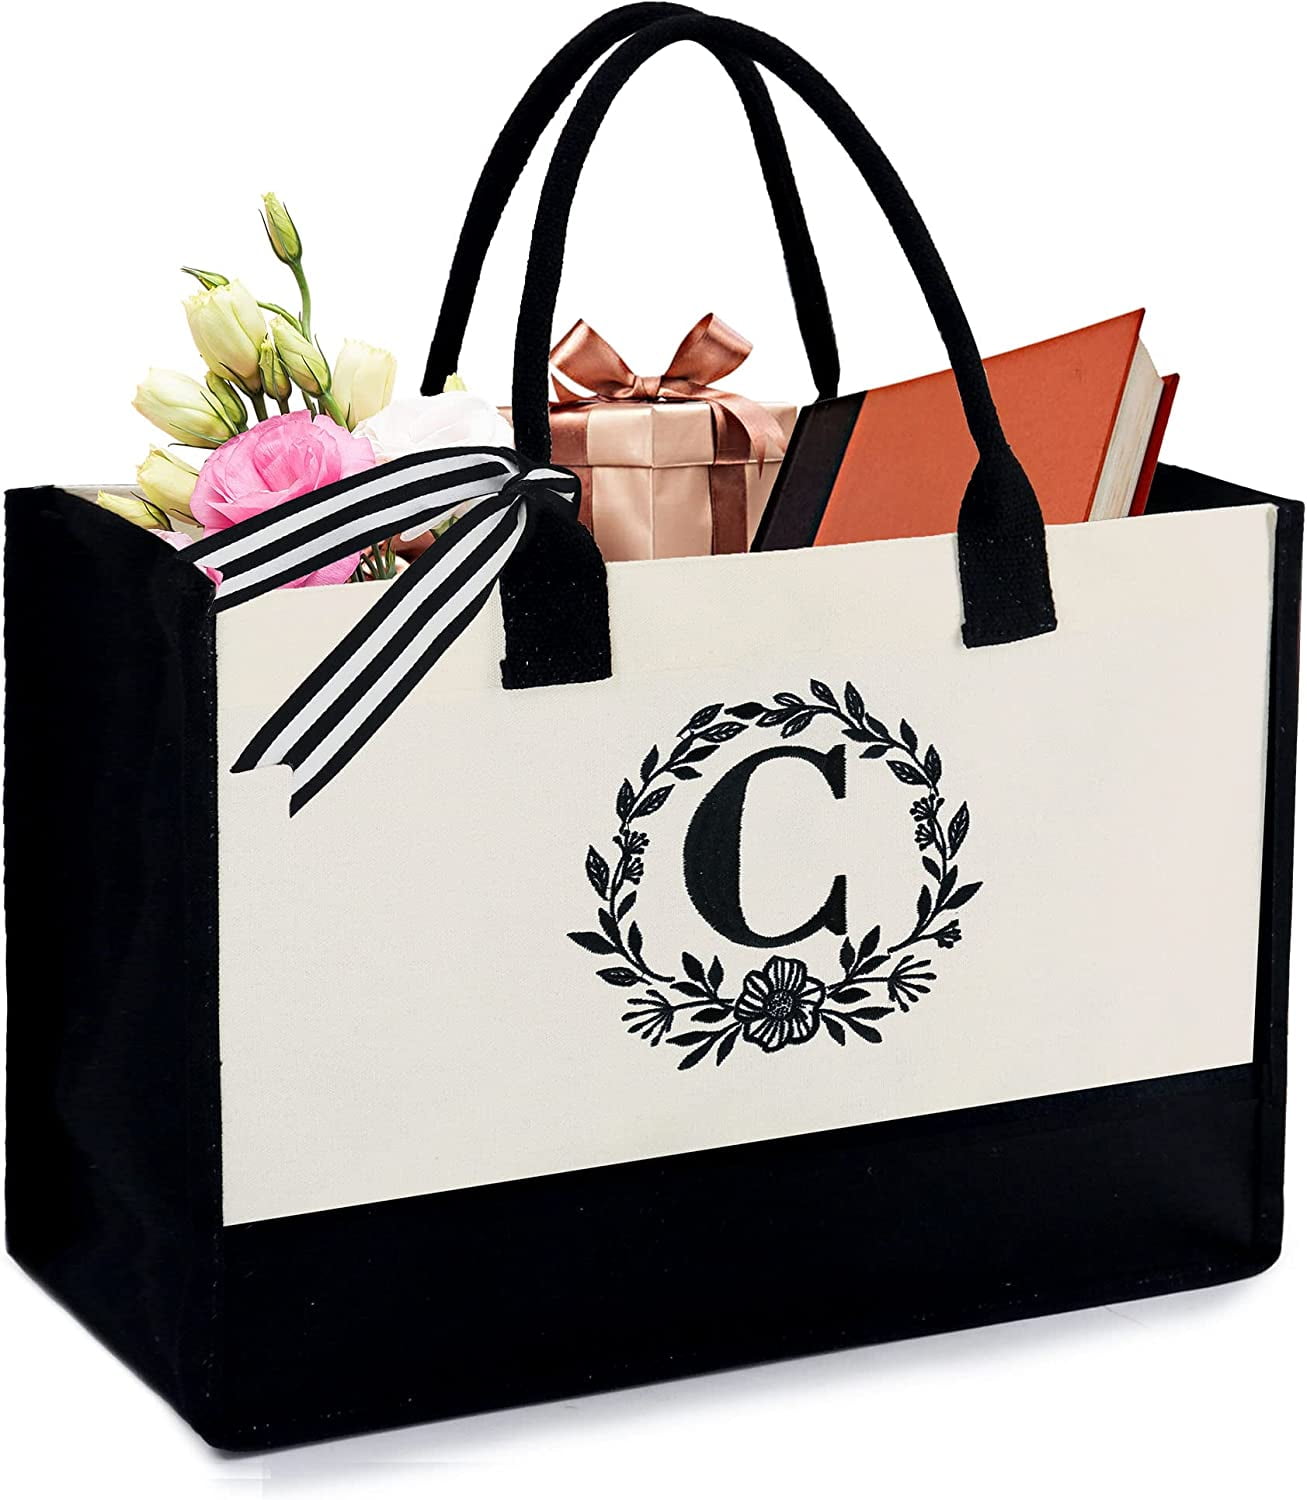 QWZNDZGR Initial Canvas Tote Bag with Zipper Pocket 13OZ Embroidery  Monogrammed Personalized Birthday Gifts for Women